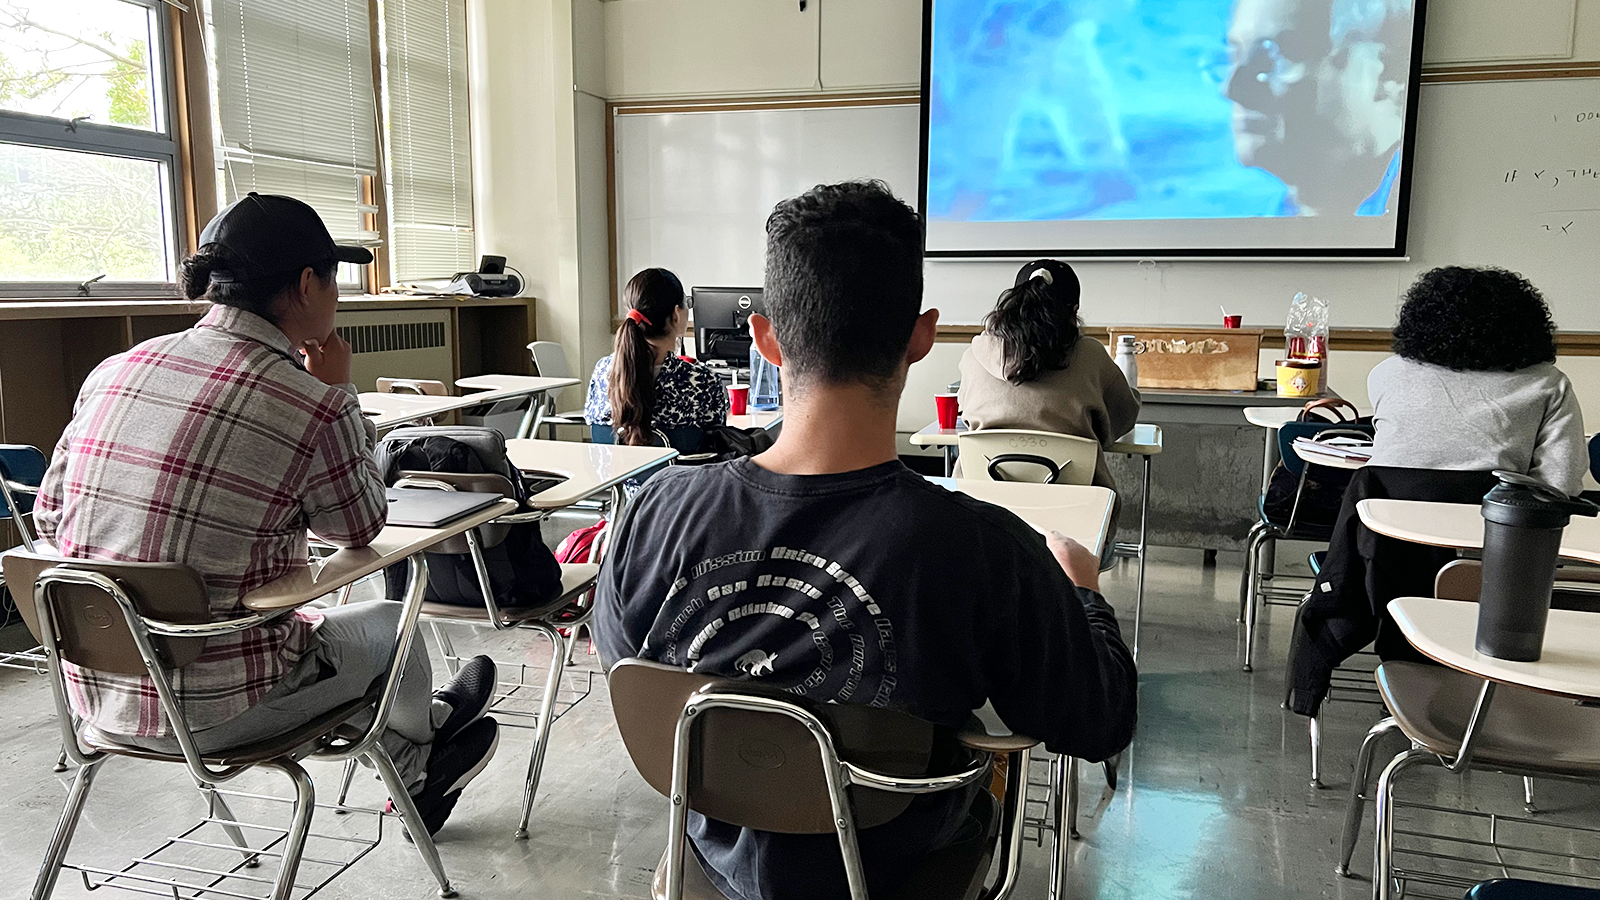 Students watching a film